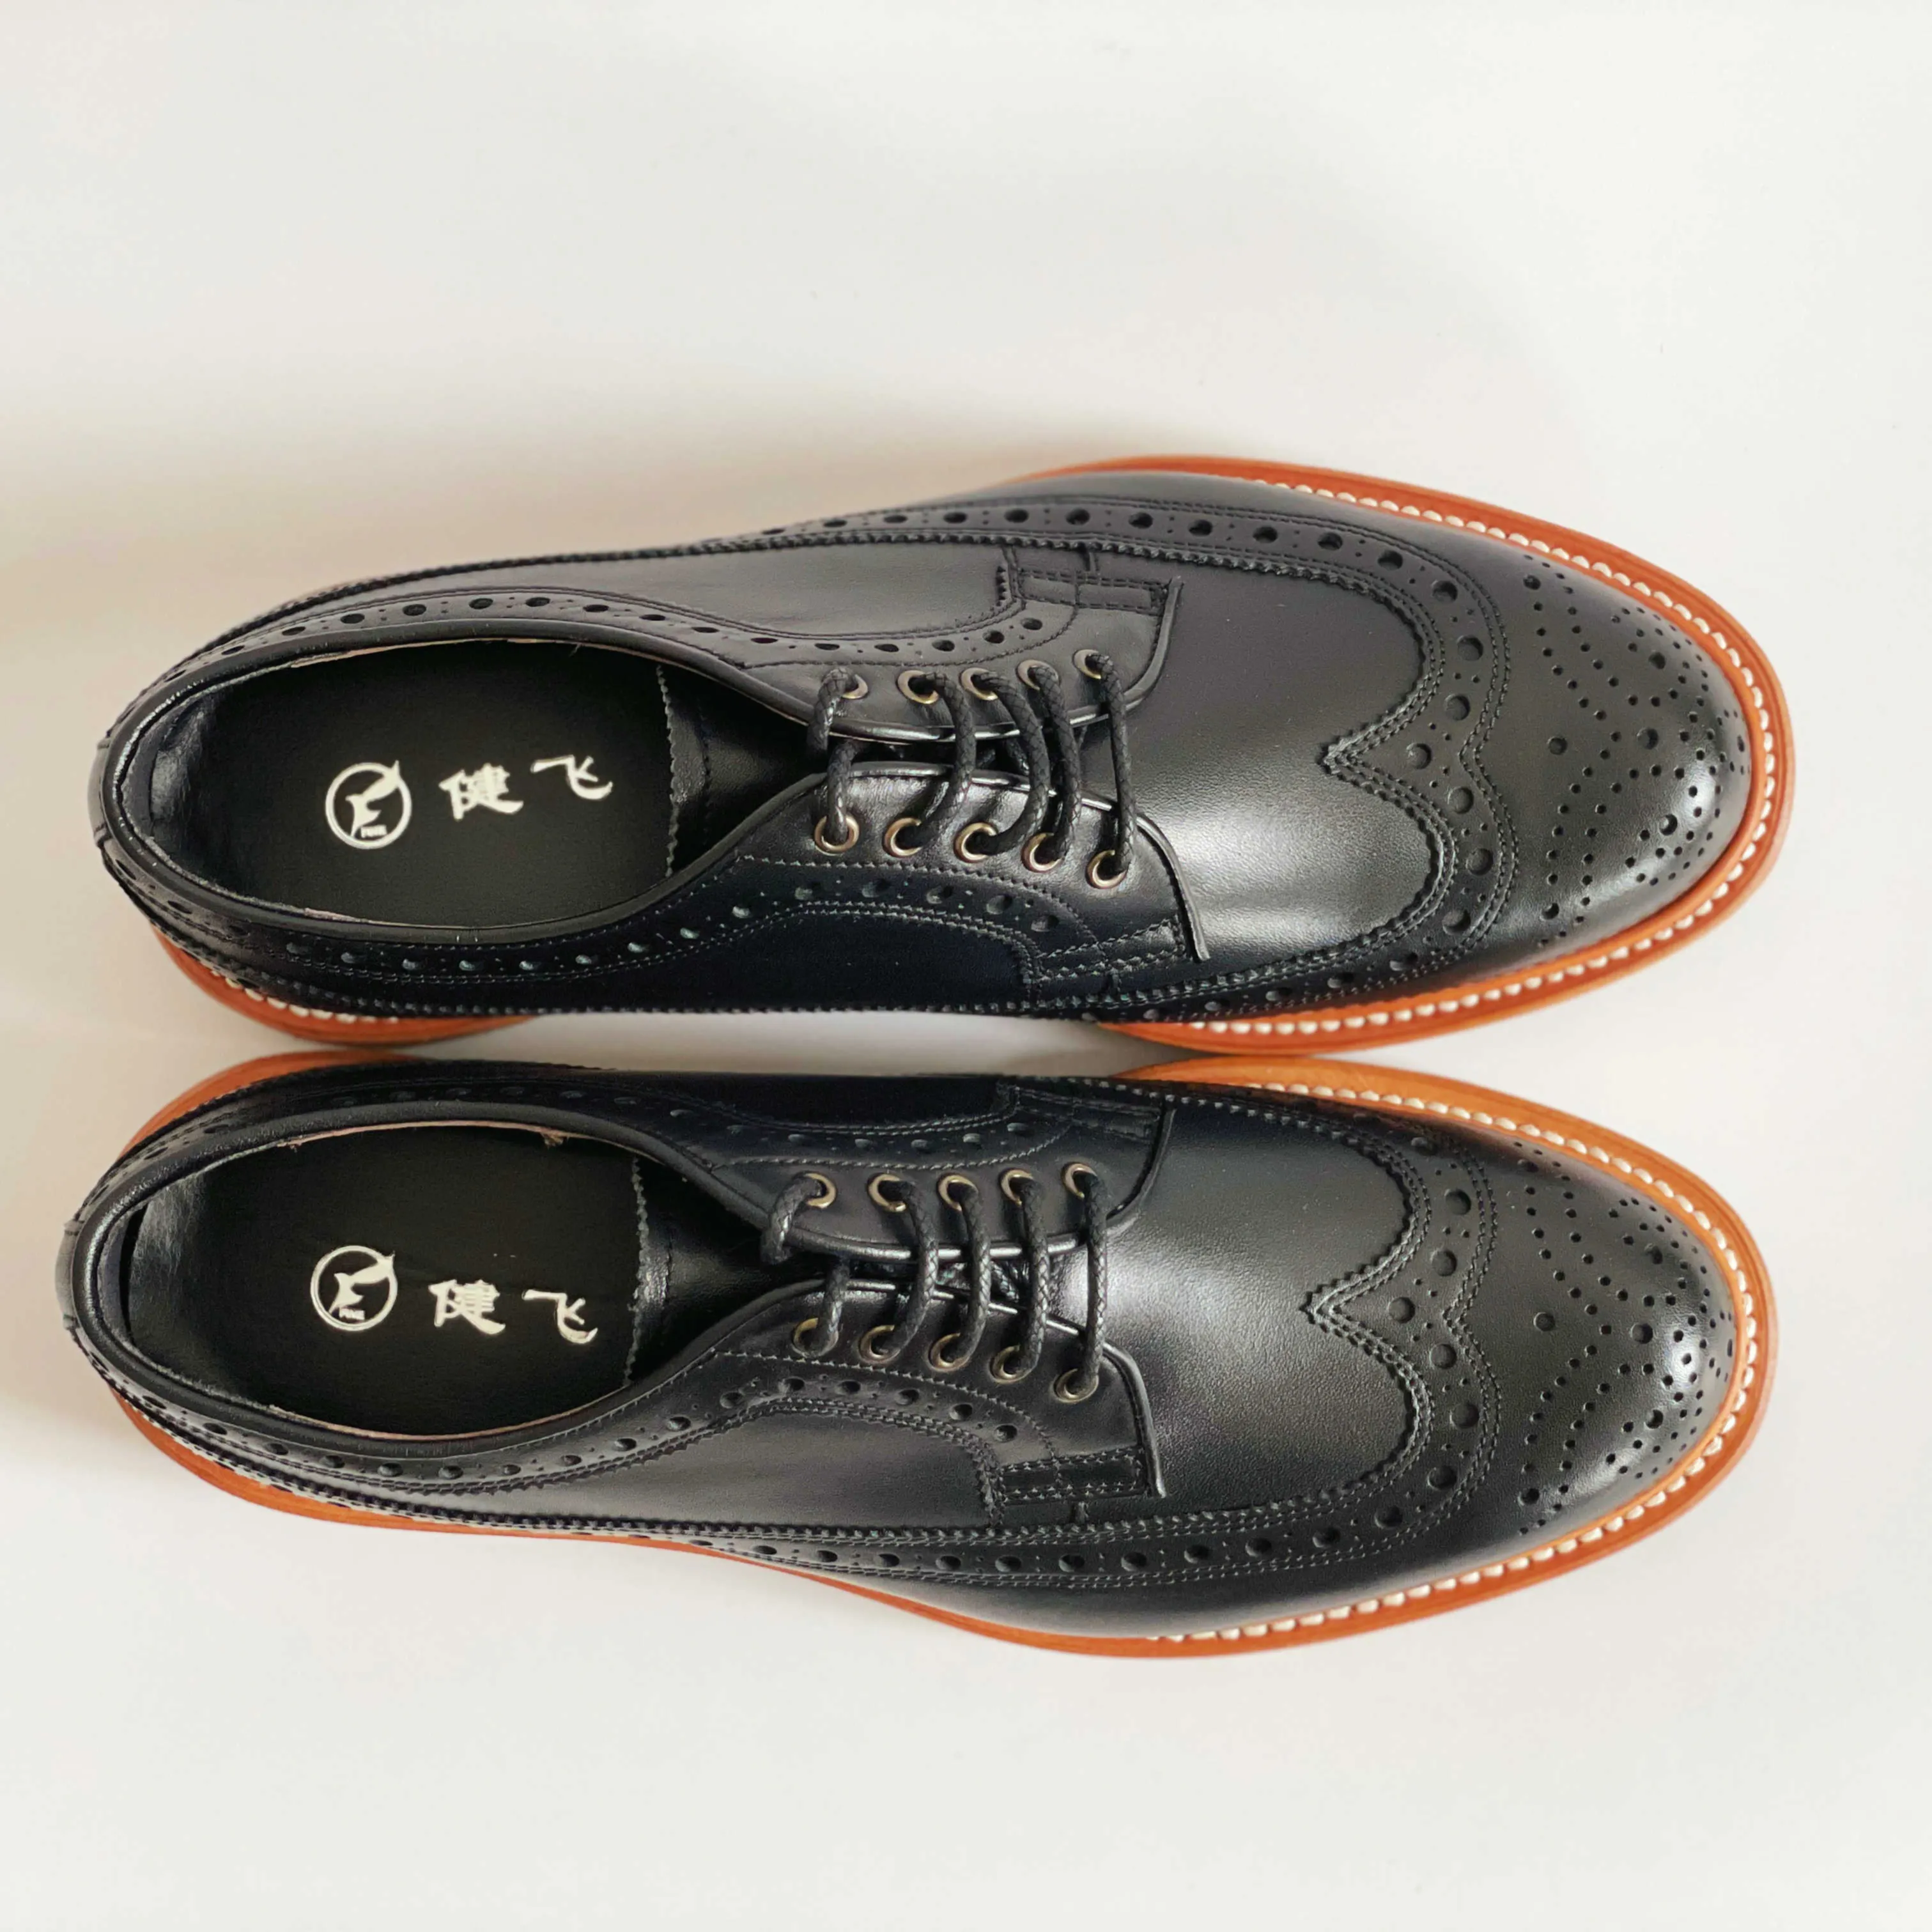 Wholesale Men's Casual Shoes Classic Black Calfskin Leather Bespoke Oxfords Goodyear Welted Handmade Craft Shoes